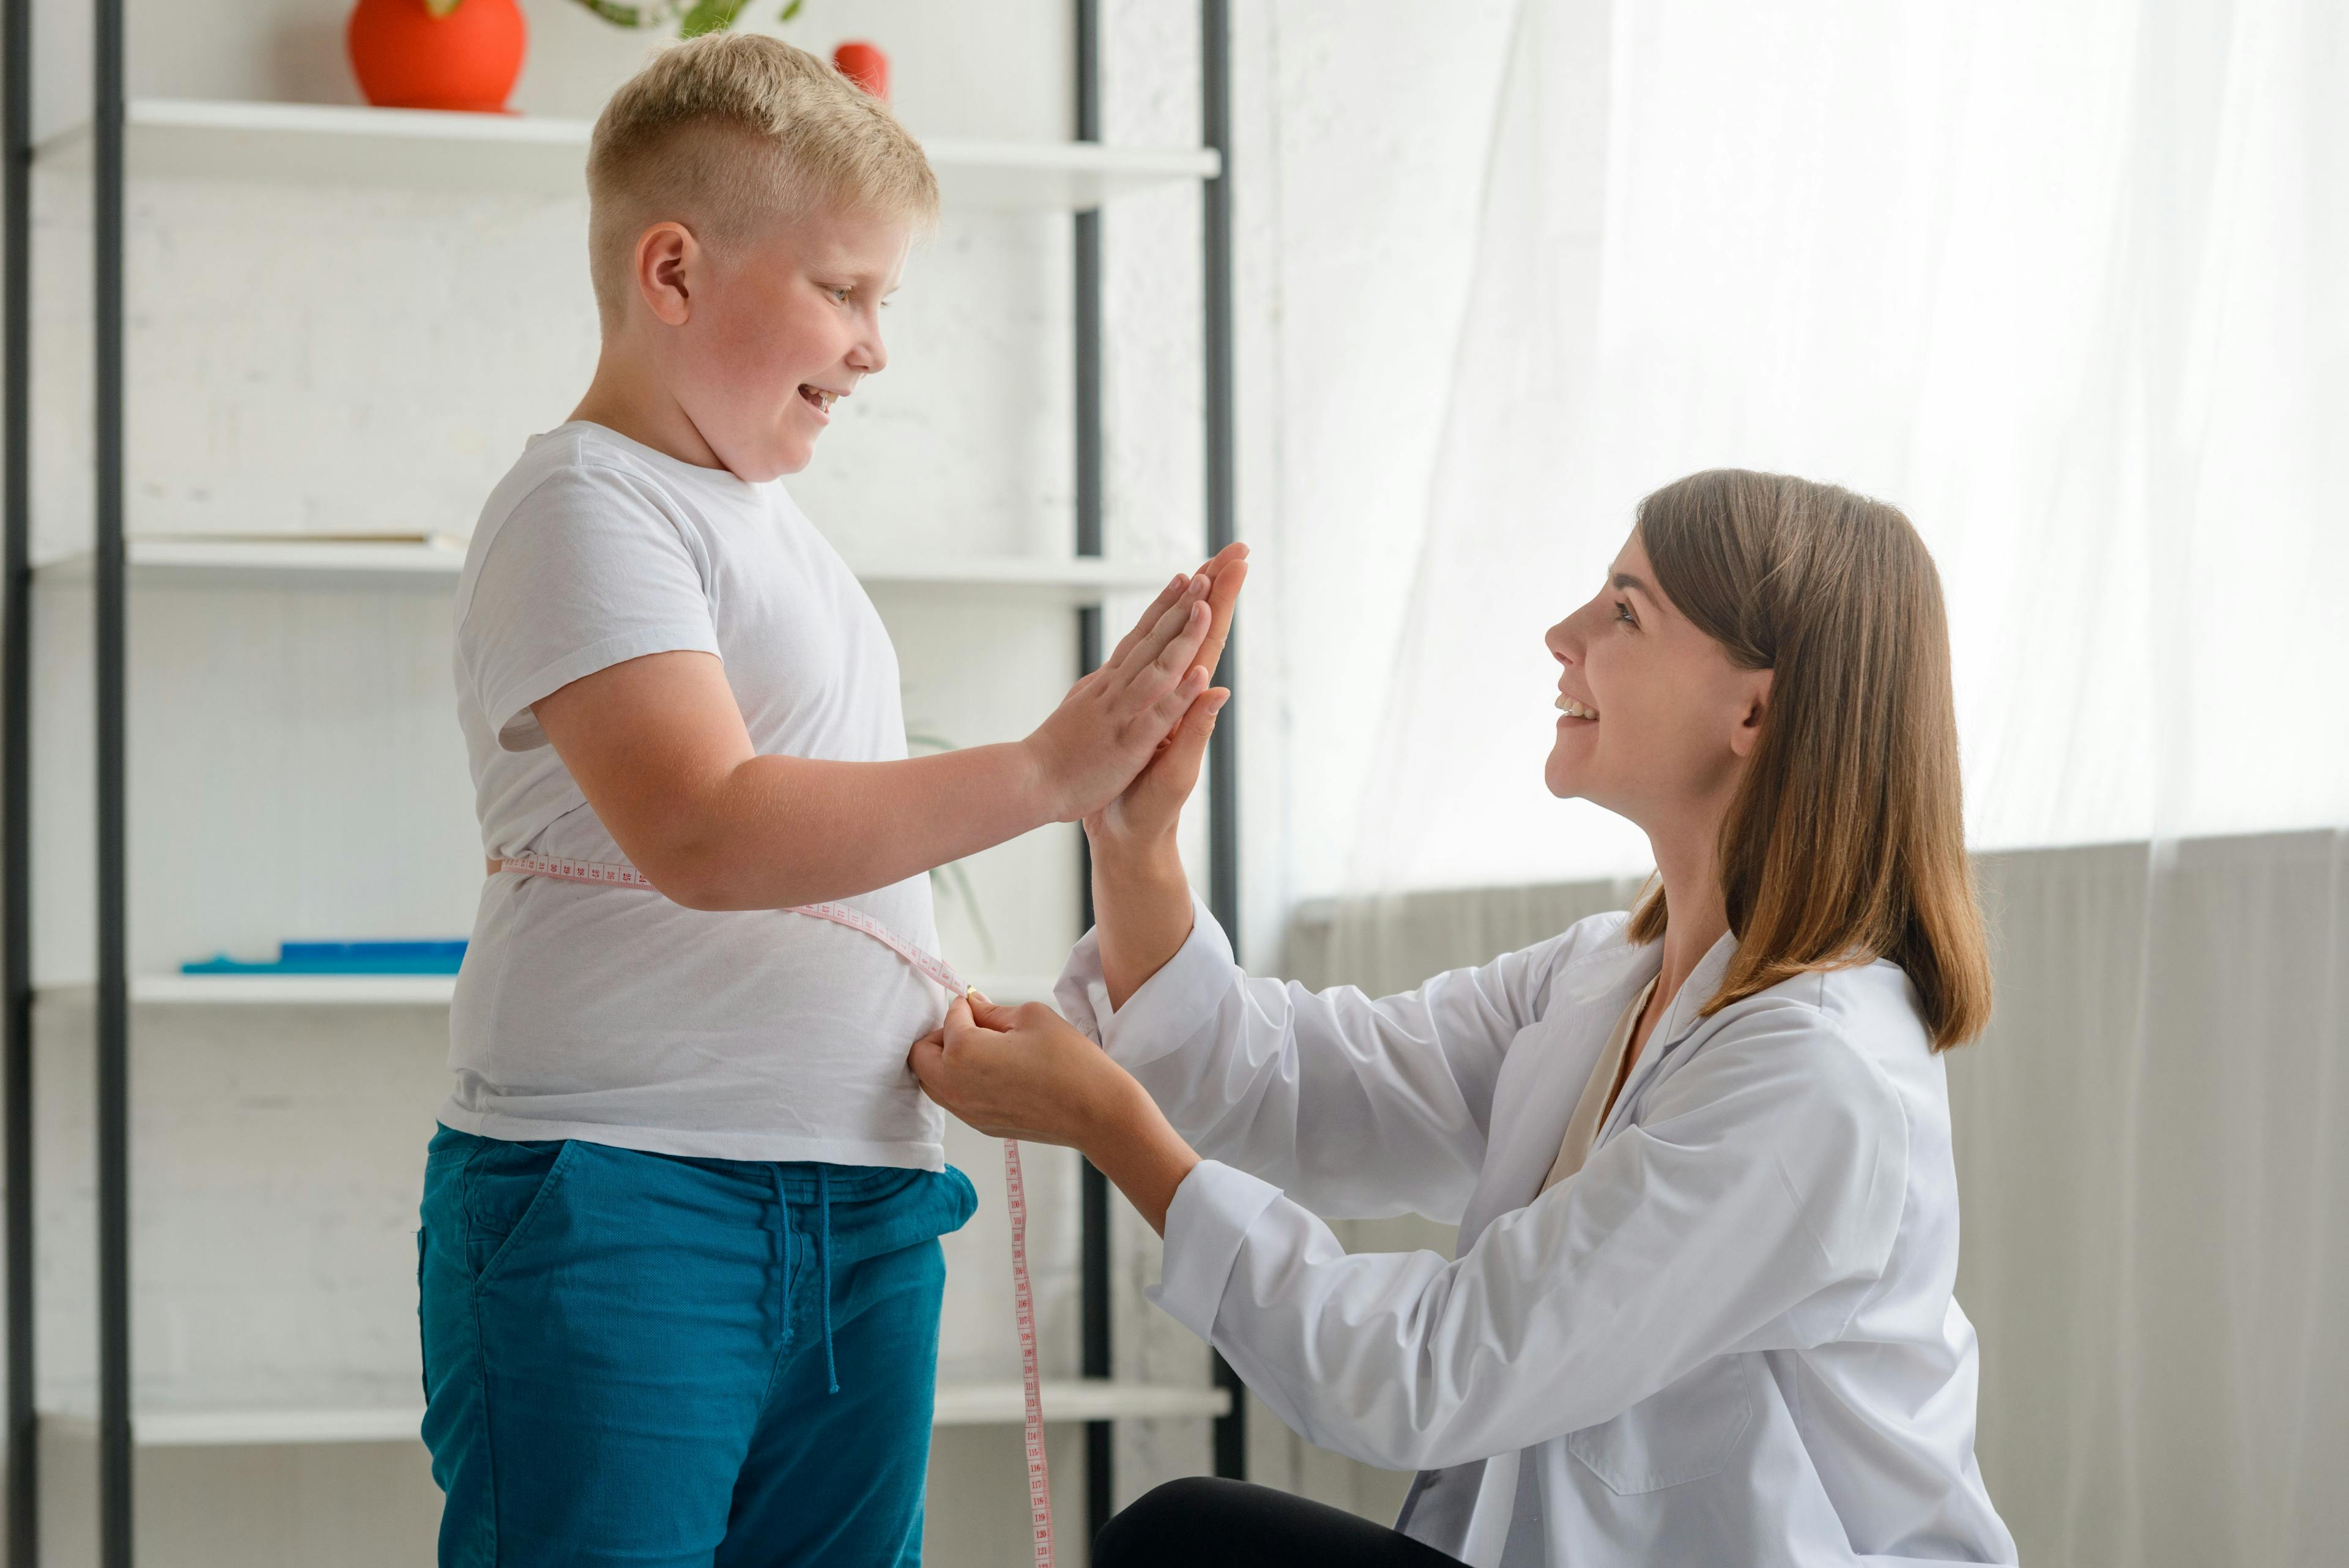 Doctor congratulates an obese boy with first good results | Image Credit: yuriygolub - stock.adobe.com